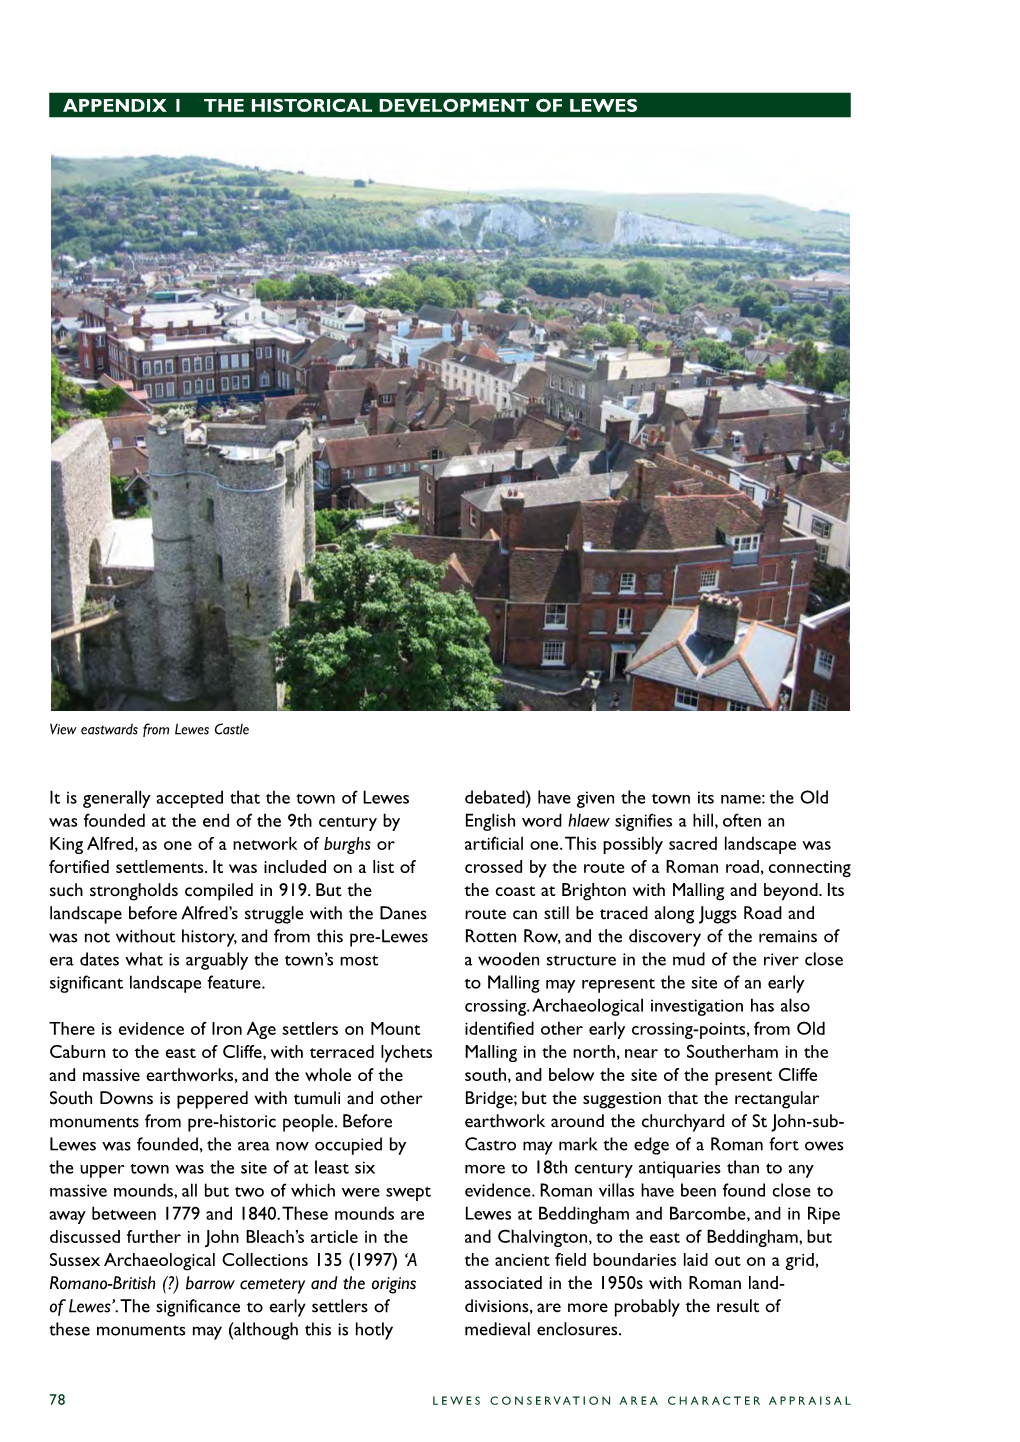 Lewes Conservation Area Appraisal Pages 80-99